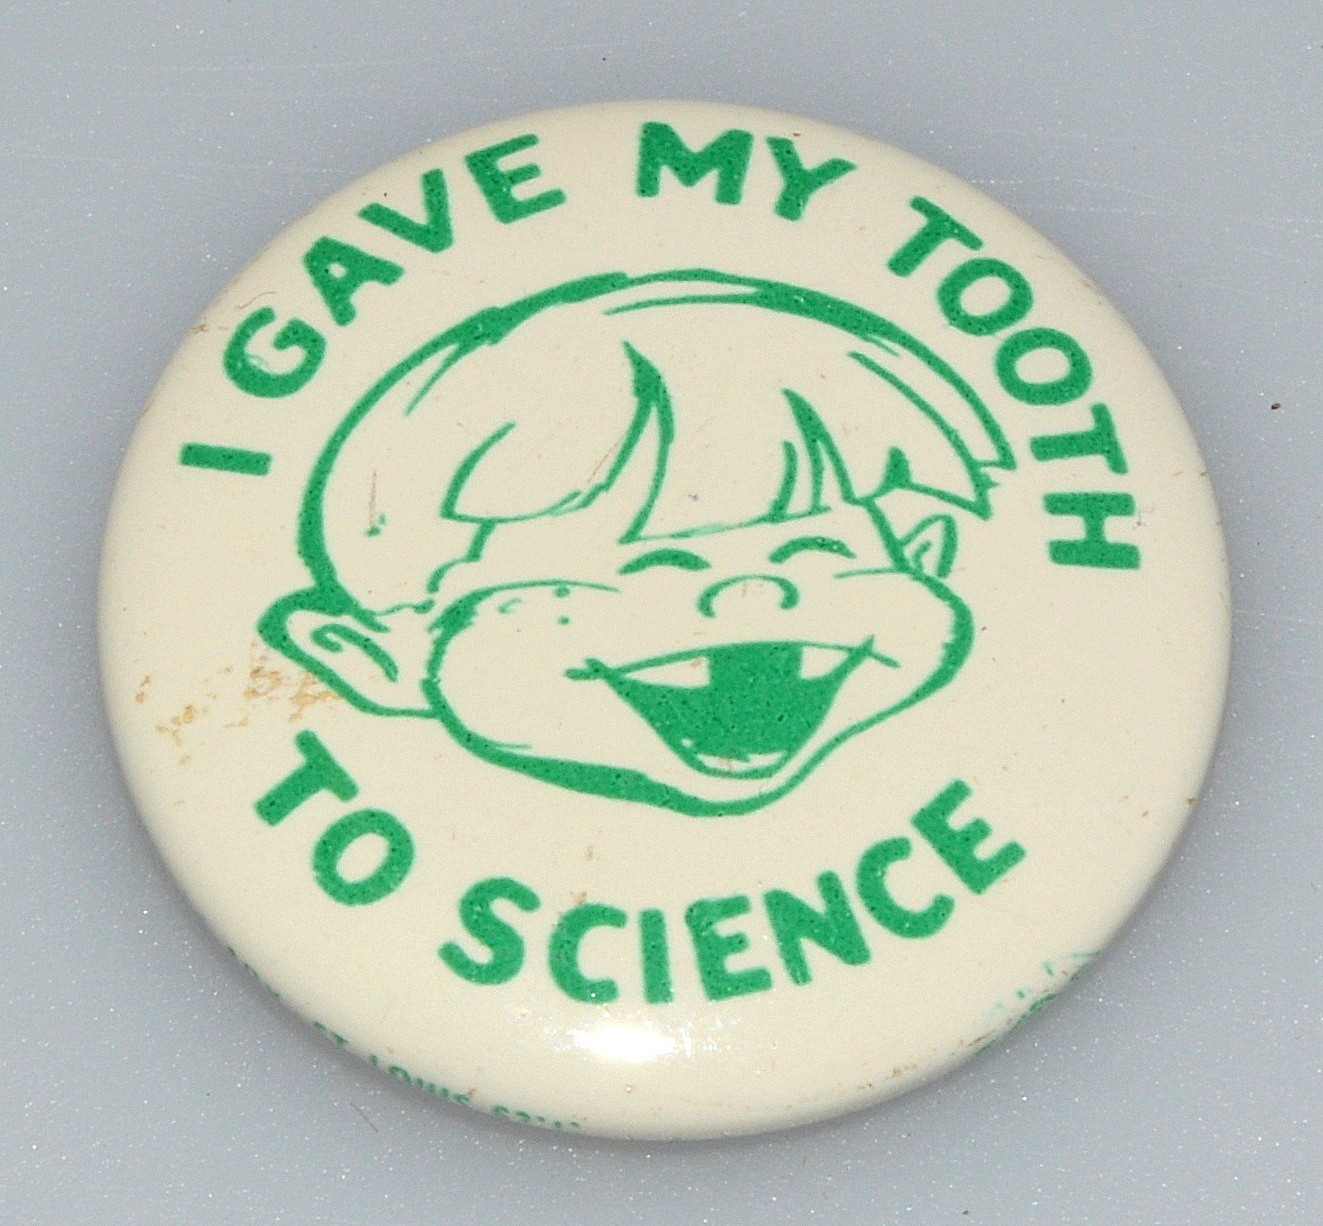 I gave my tooth to science